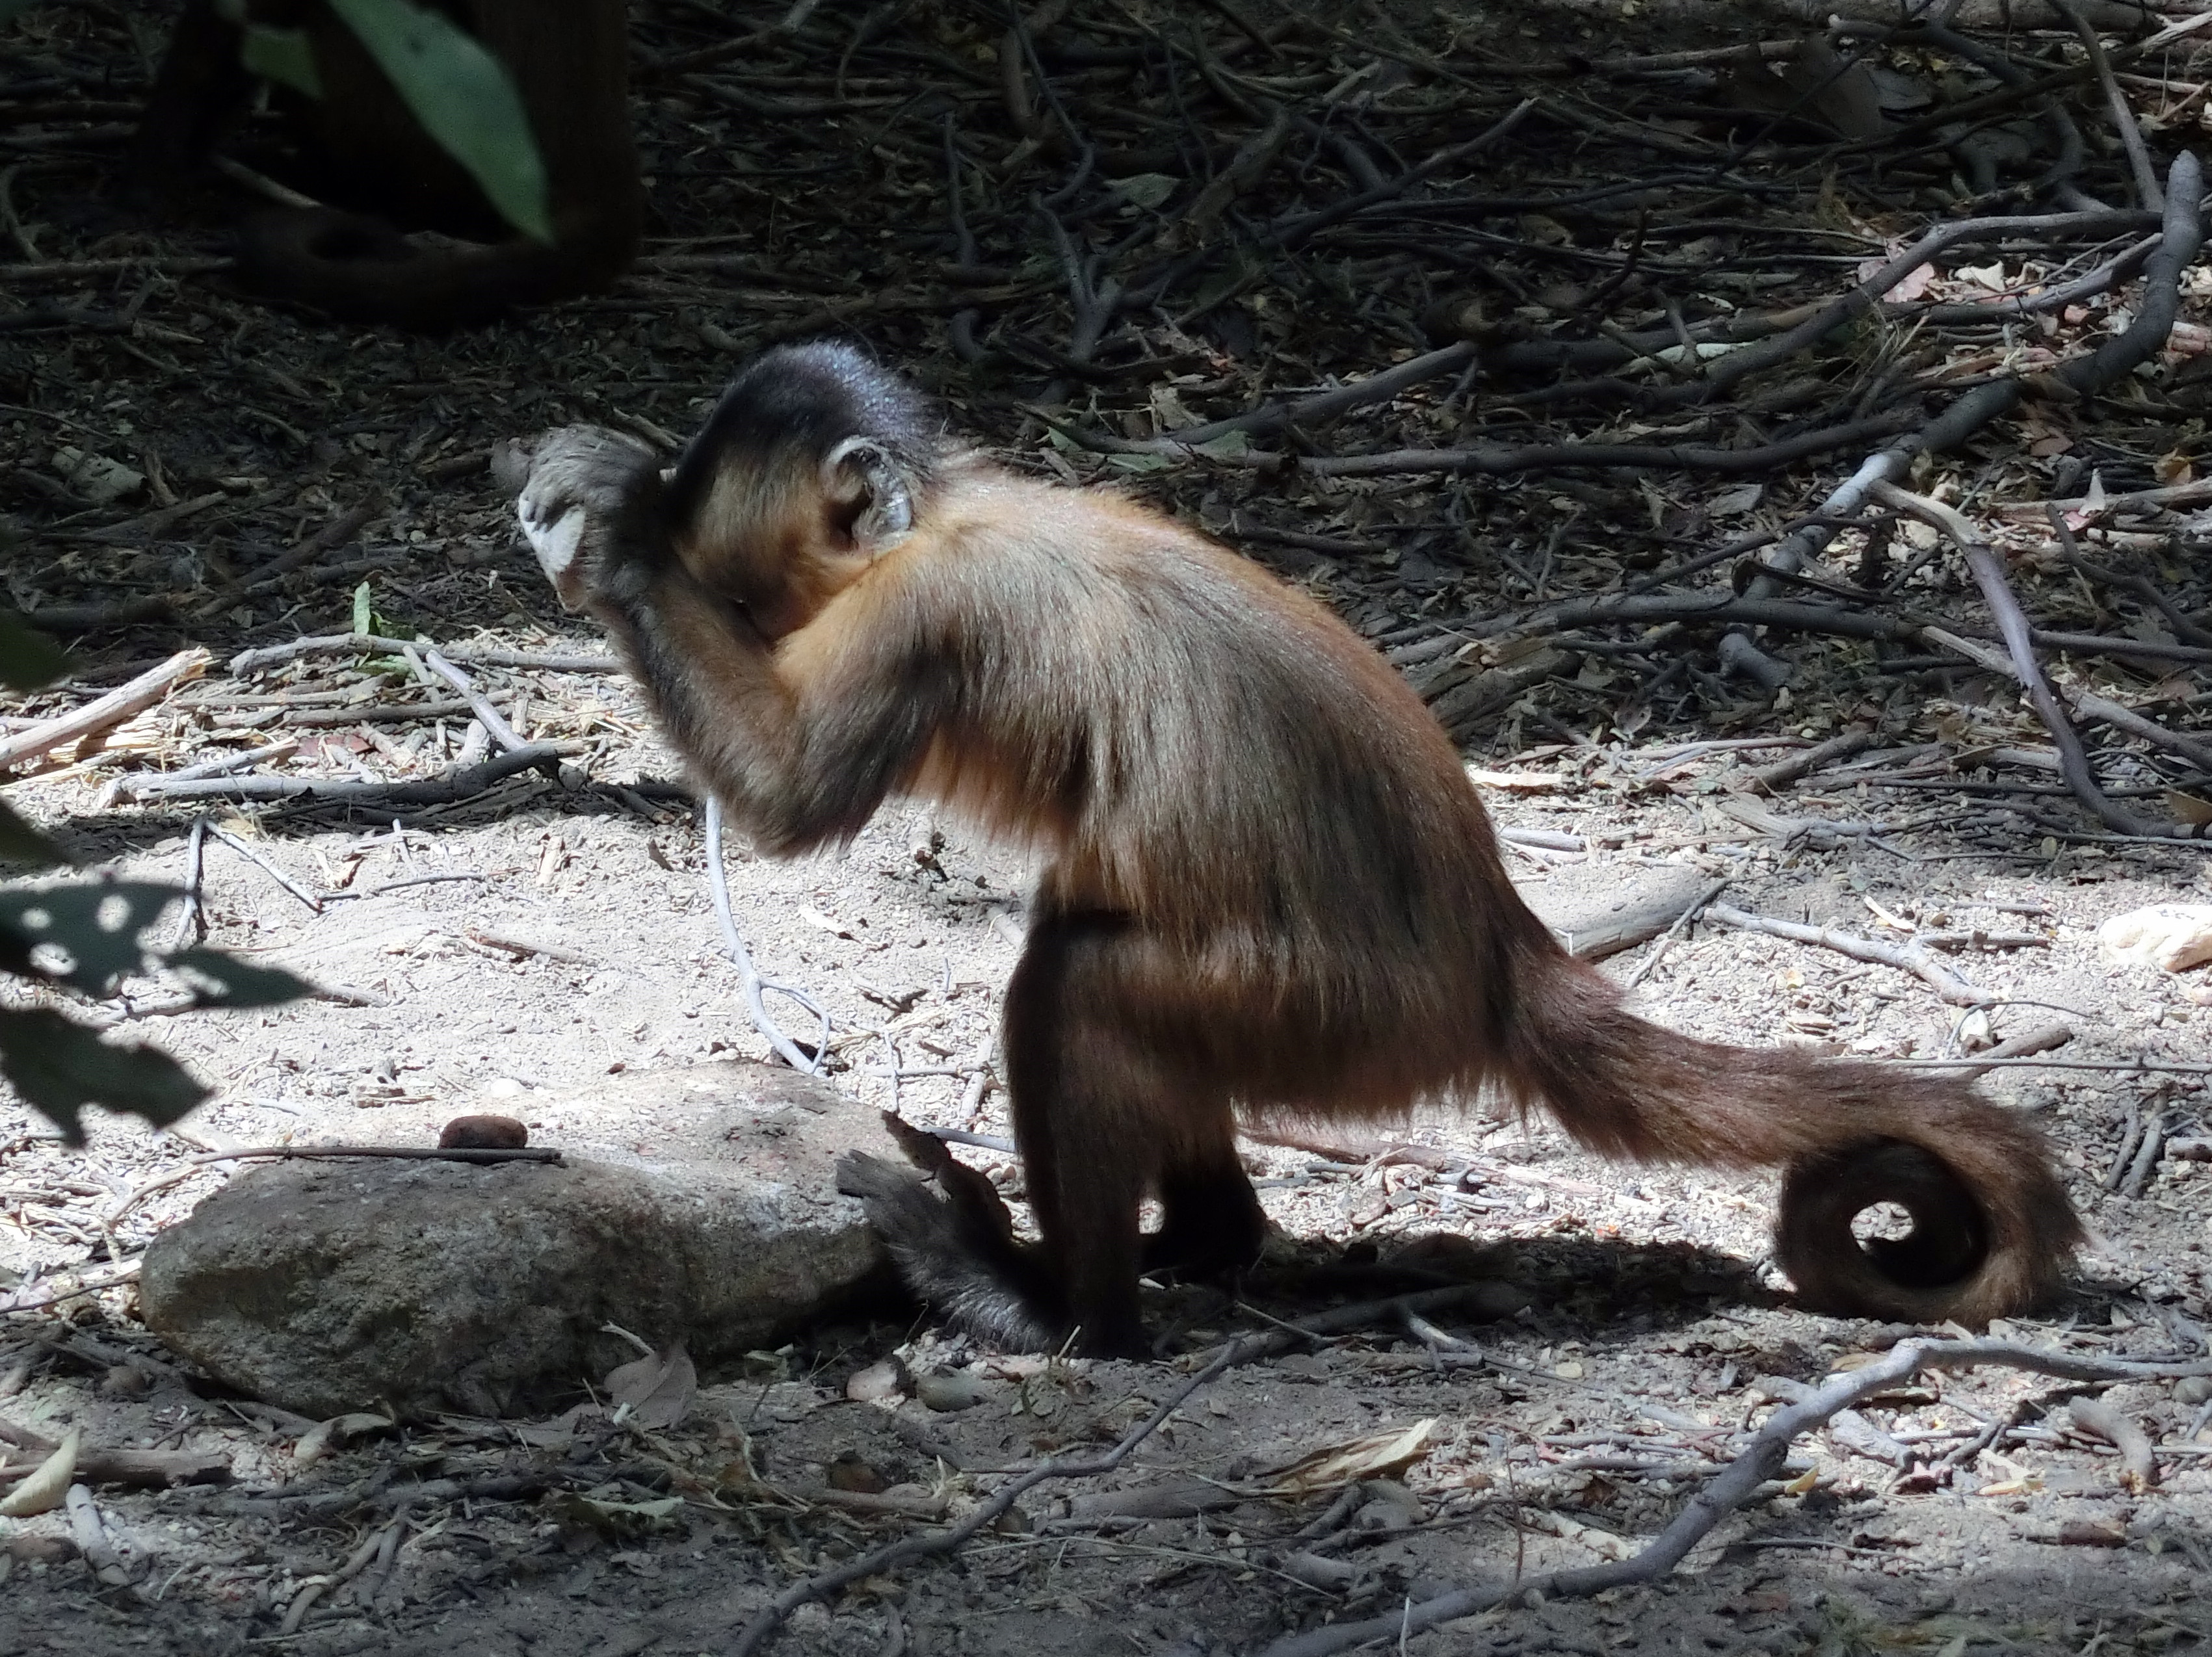 Monkeys in Brazil have used stone tools for hundreds of years at least